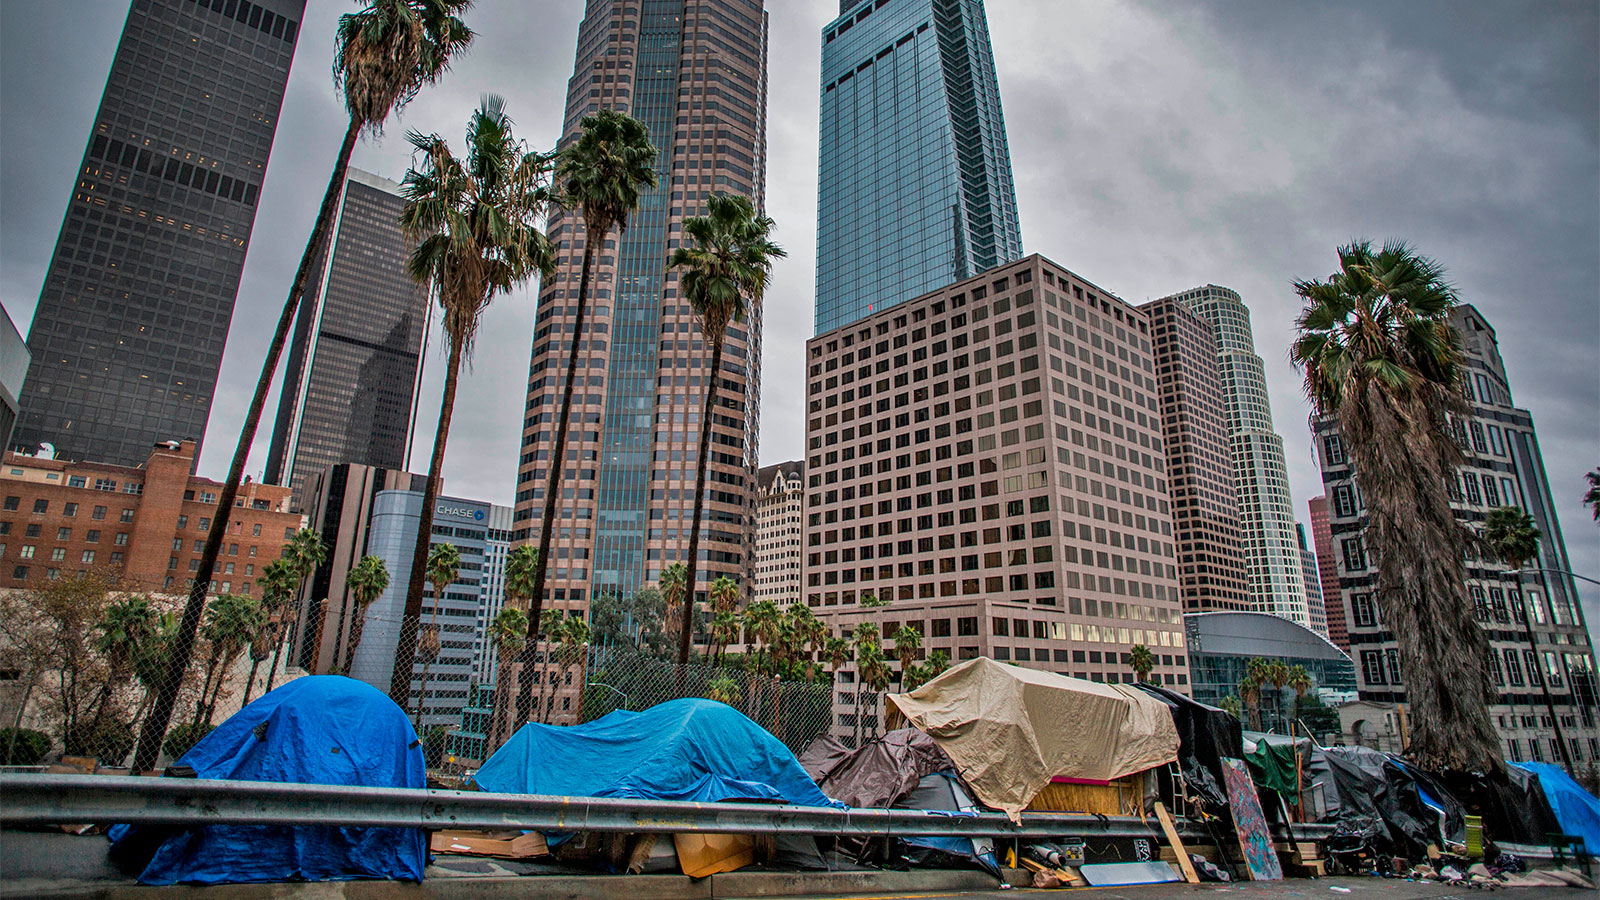 A row of homeless tents in front of tall building in downtown Los Angeles.